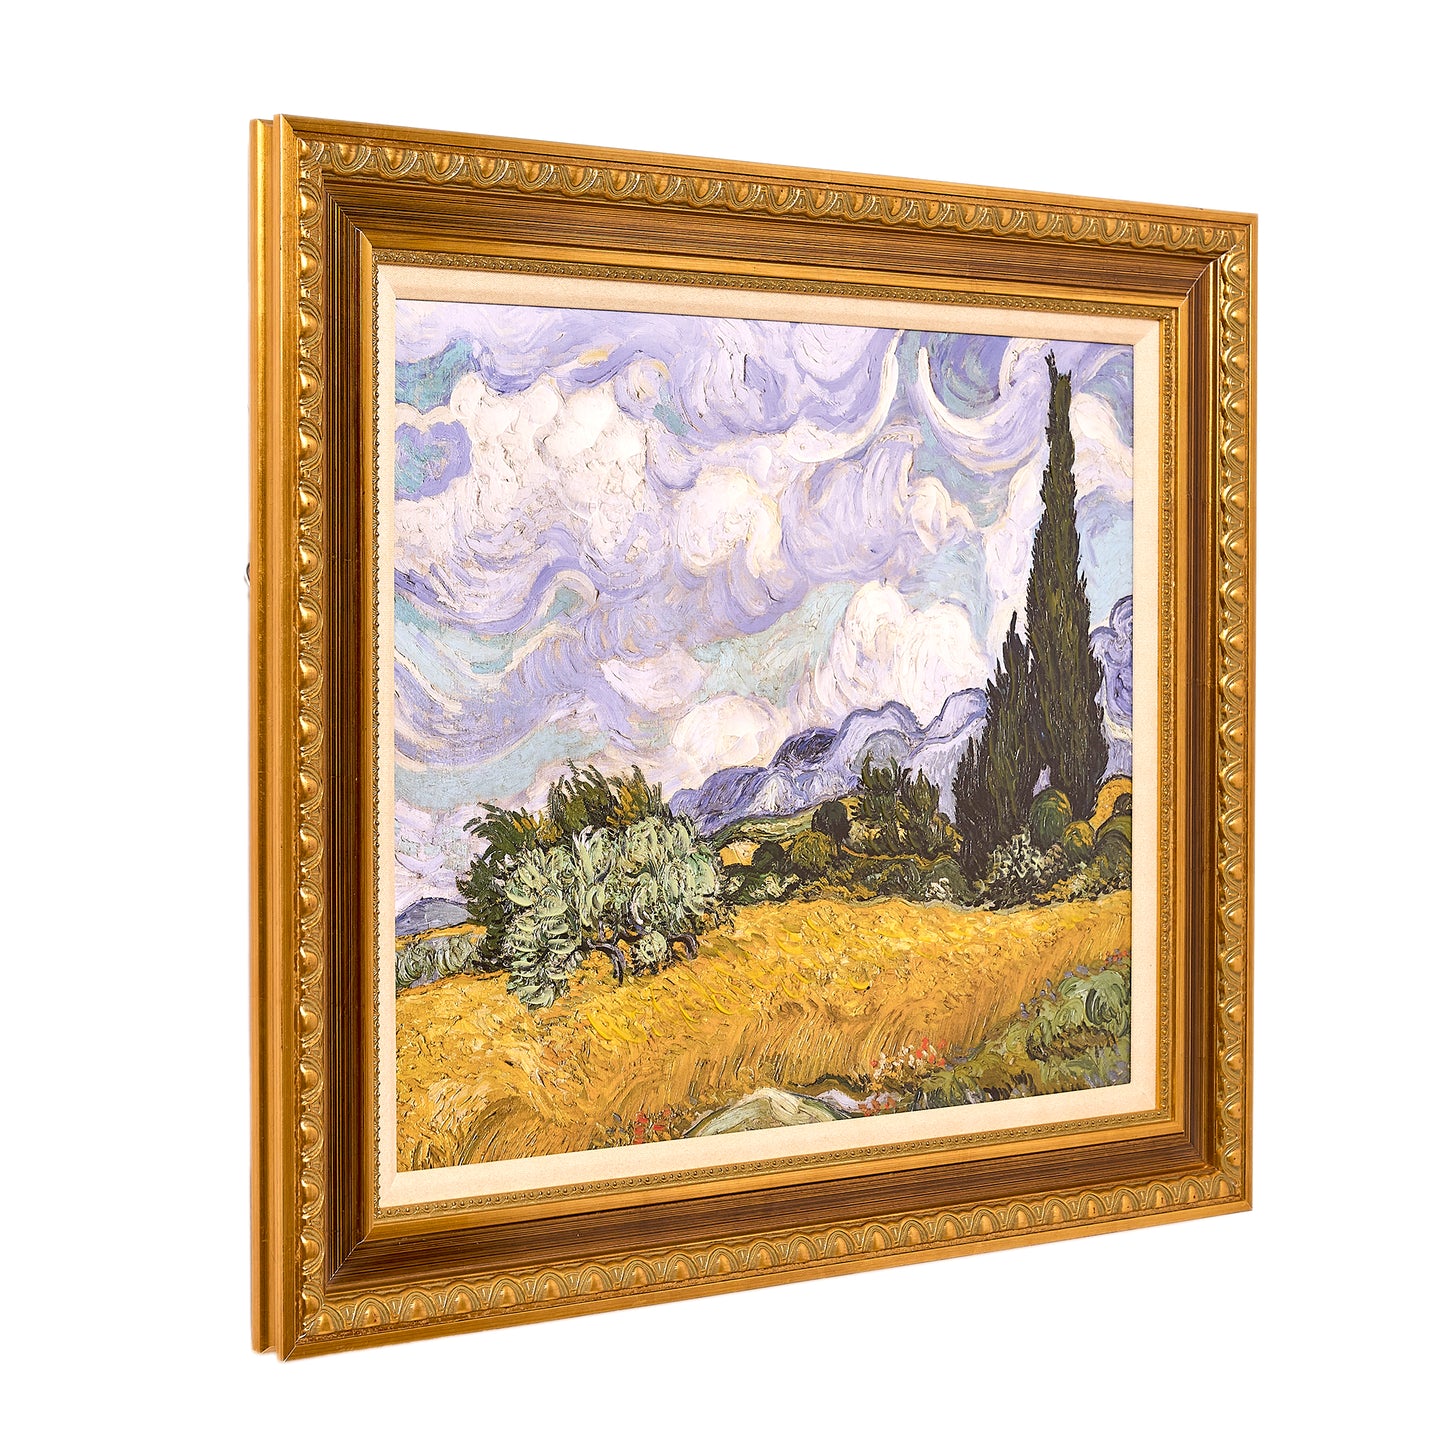 Ornate Framed Wheat Field with Cypresses Canvas Print by Vincent van Gogh 30.75" x 26.75"